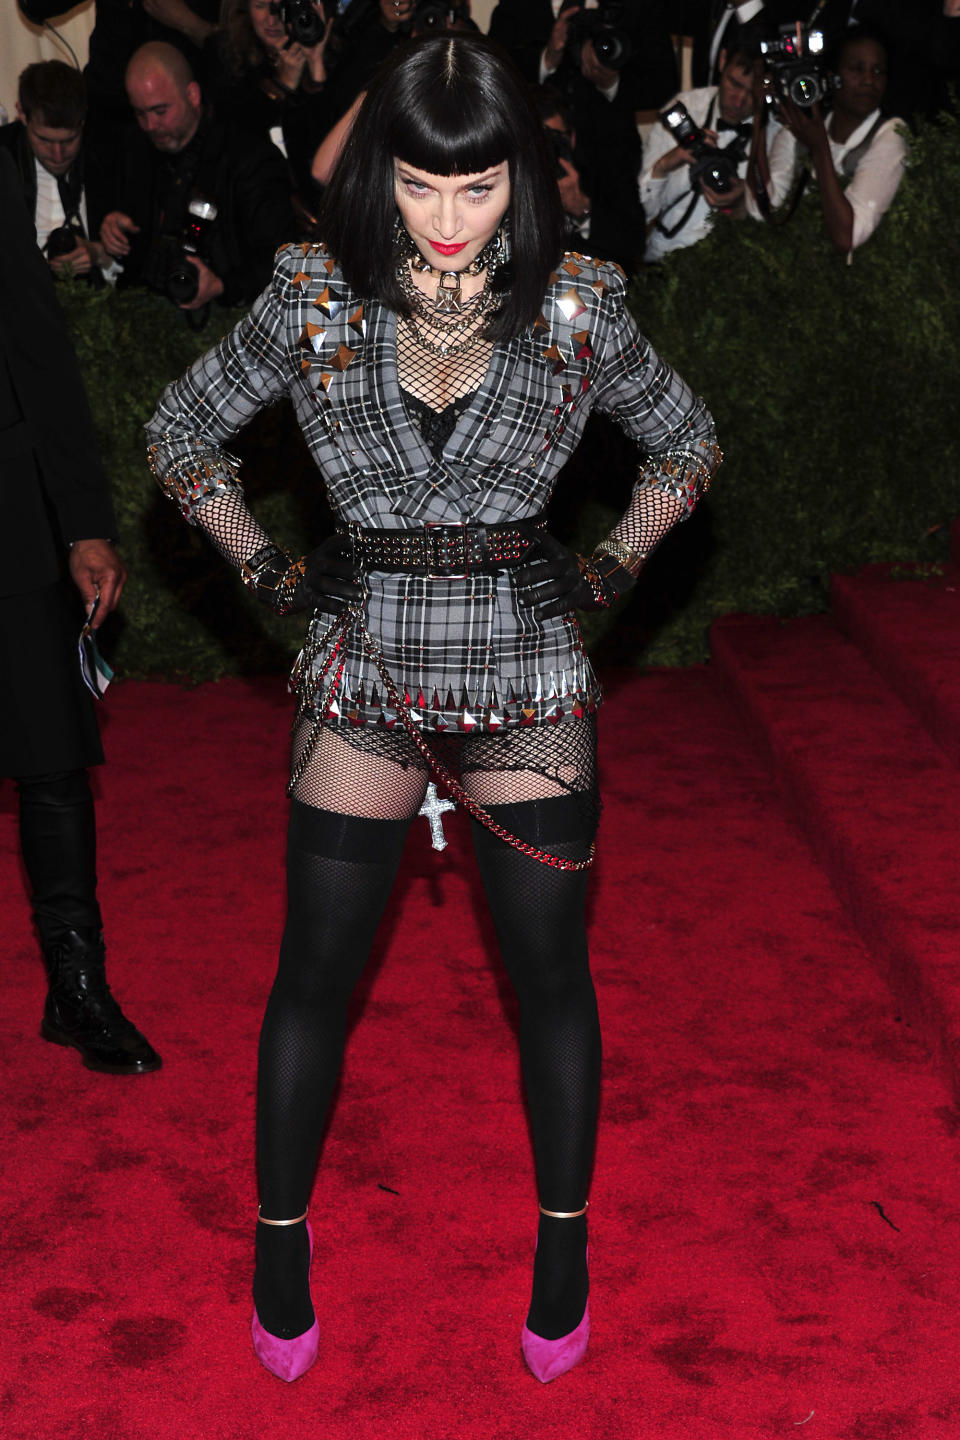 Madonna attends The Metropolitan Museum of Art's Costume Institute benefit celebrating "PUNK: Chaos to Couture" on Monday May 6, 2013 in New York. (Photo by Charles Sykes/Invision/AP)